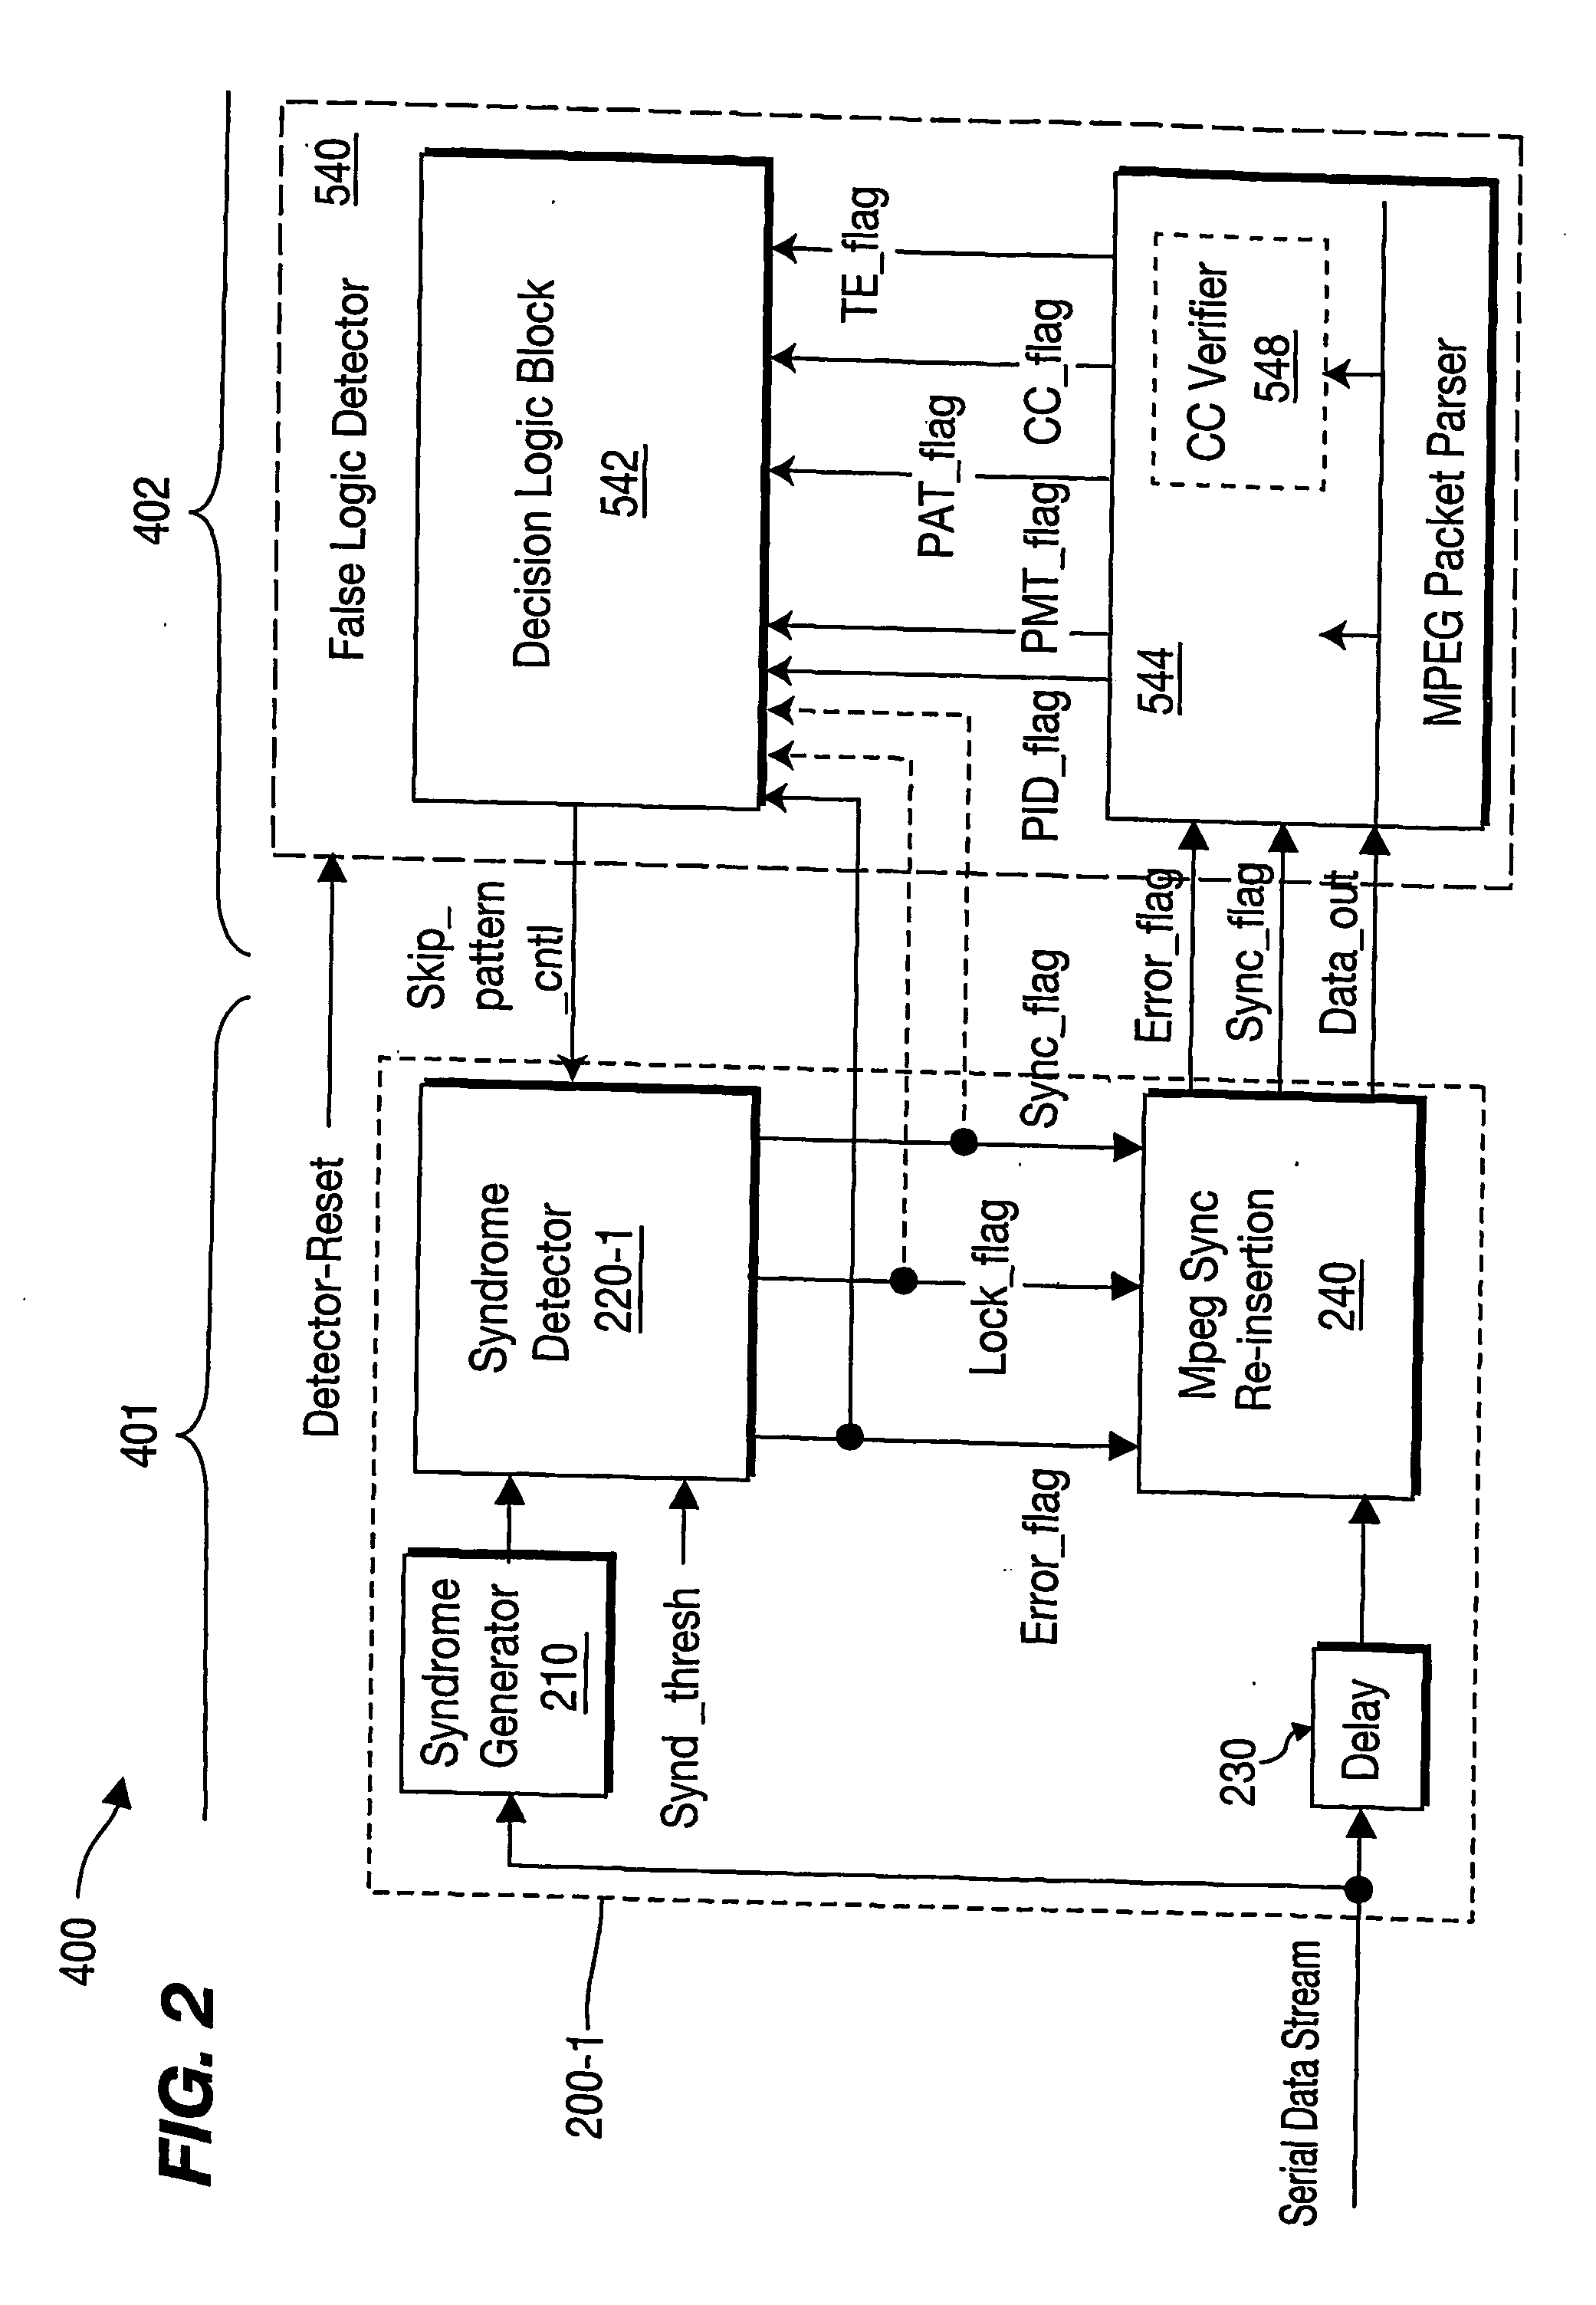 Method and Apparatus for False Sync Lock Detection in a Digital Media Receiver